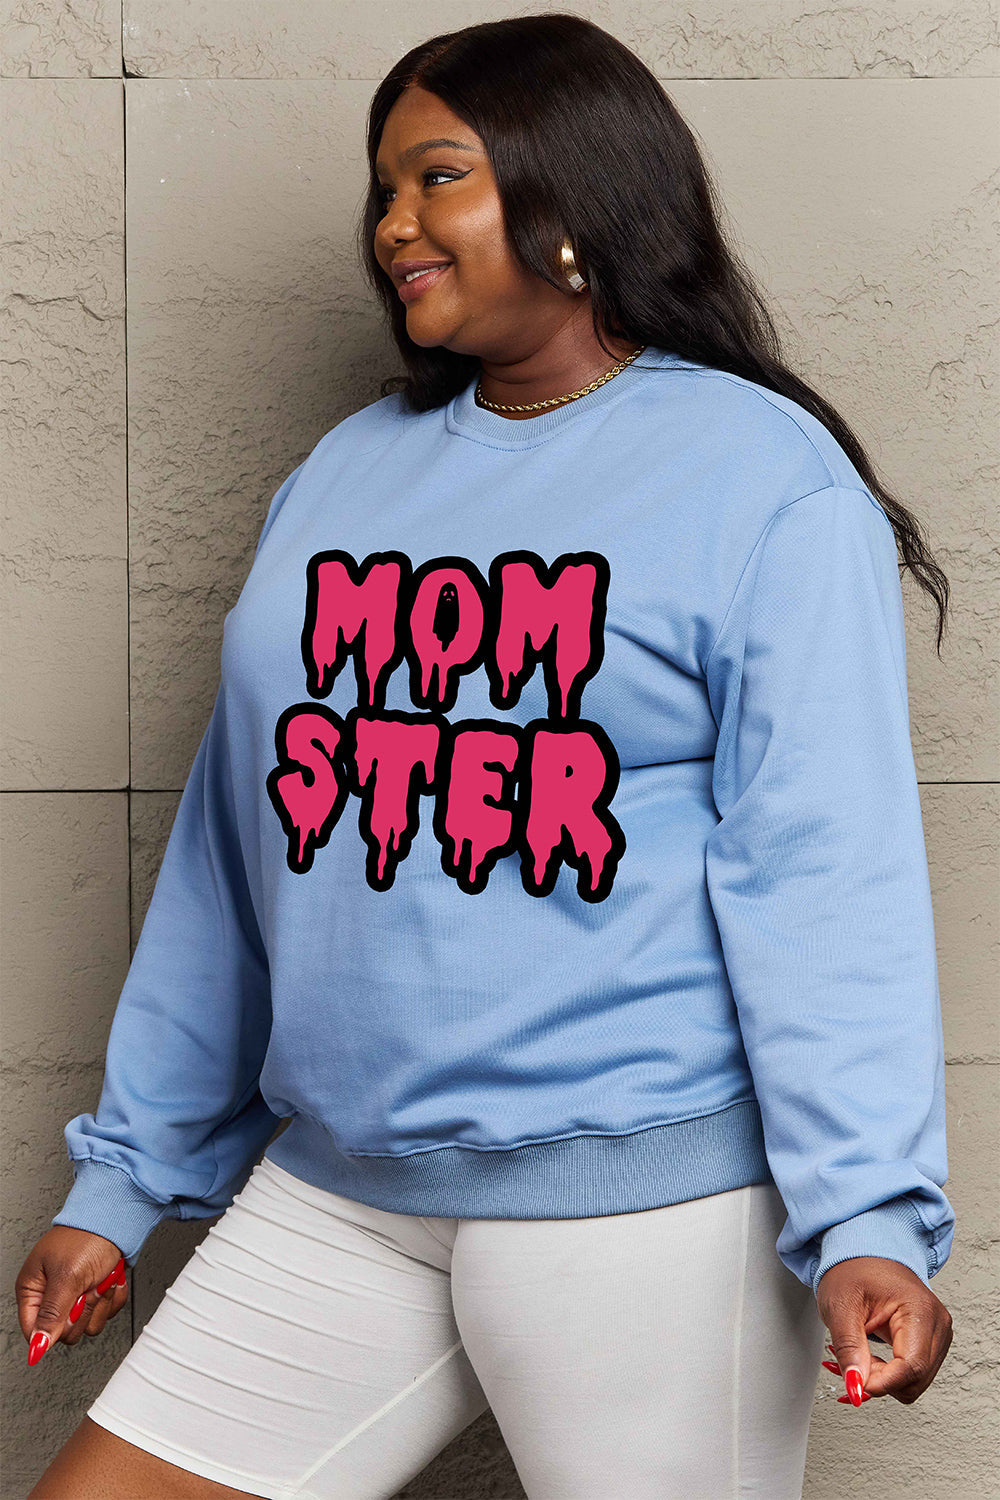 Simply Love Full Size MOM STER Graphic Sweatshirt BLUE ZONE PLANET